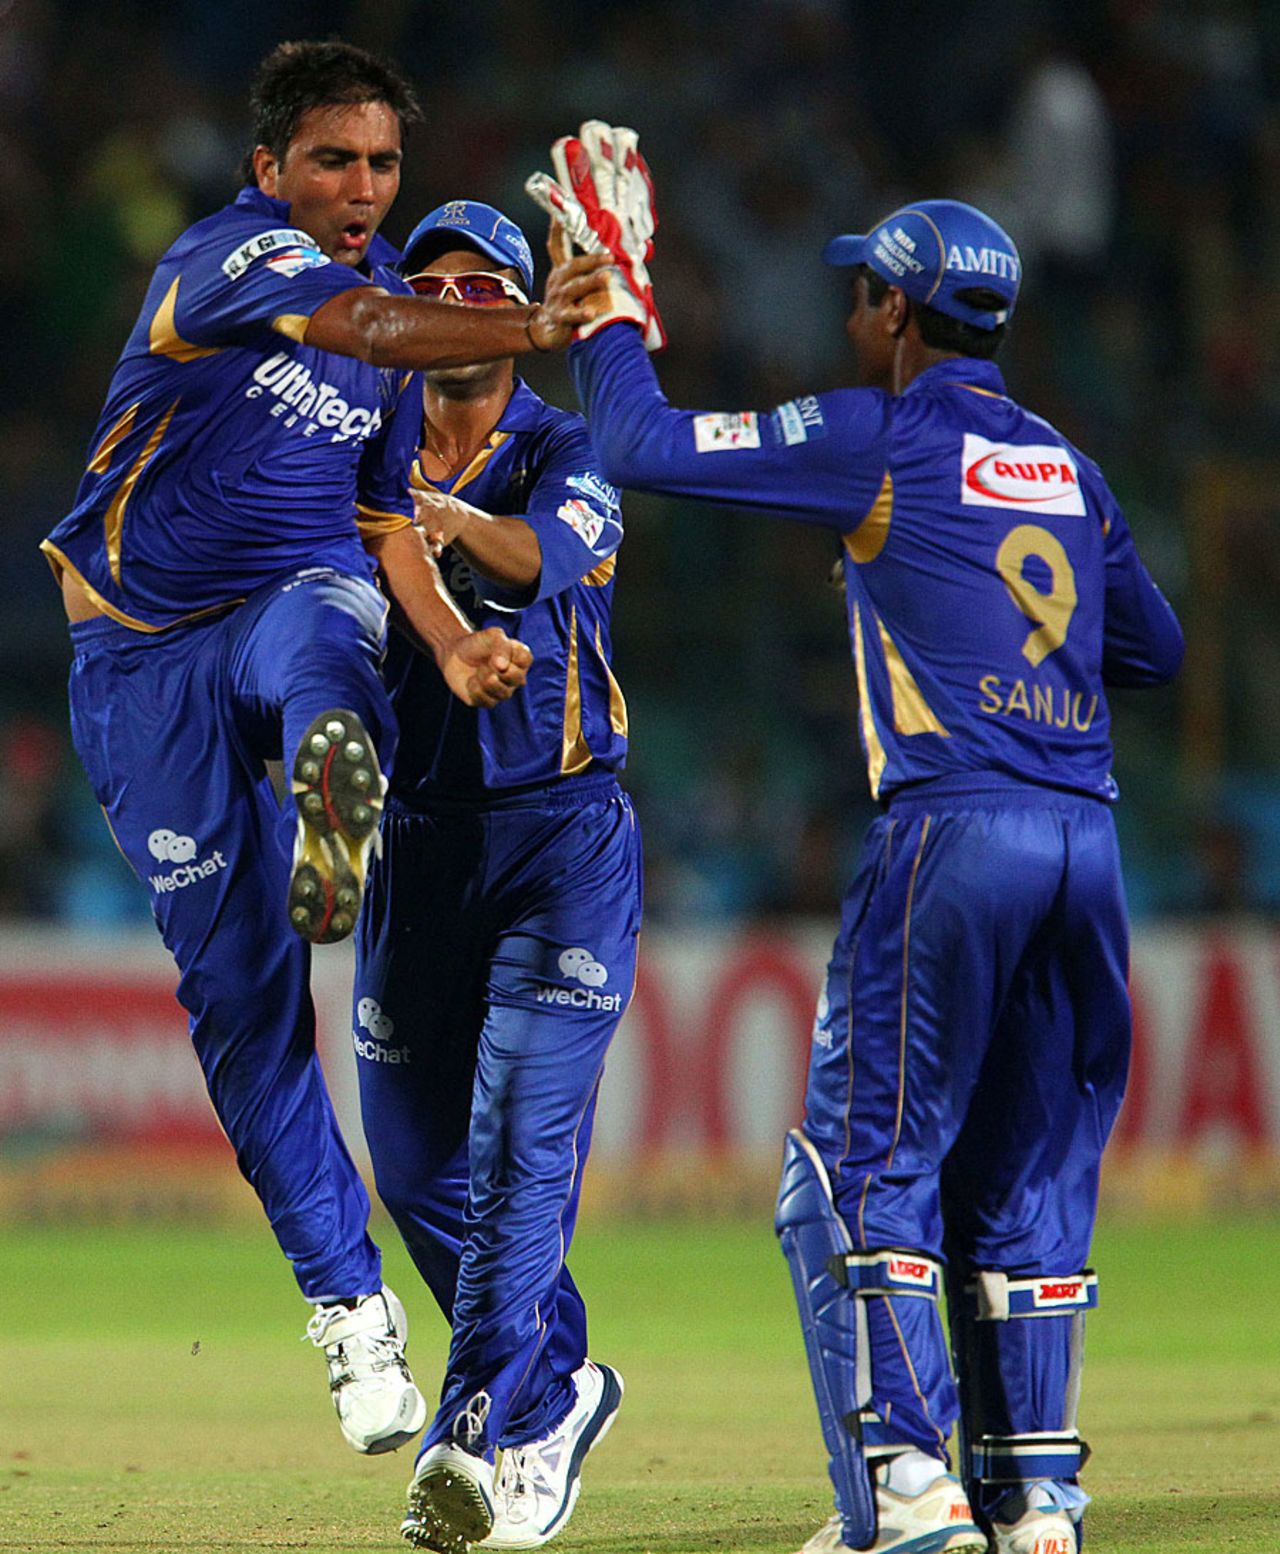 Vikramjeet Malik and his team-mates celebrate a wicket, Lions v Rajasthan Royals, Group A, Champions League 2013, Jaipur, September 25, 2013